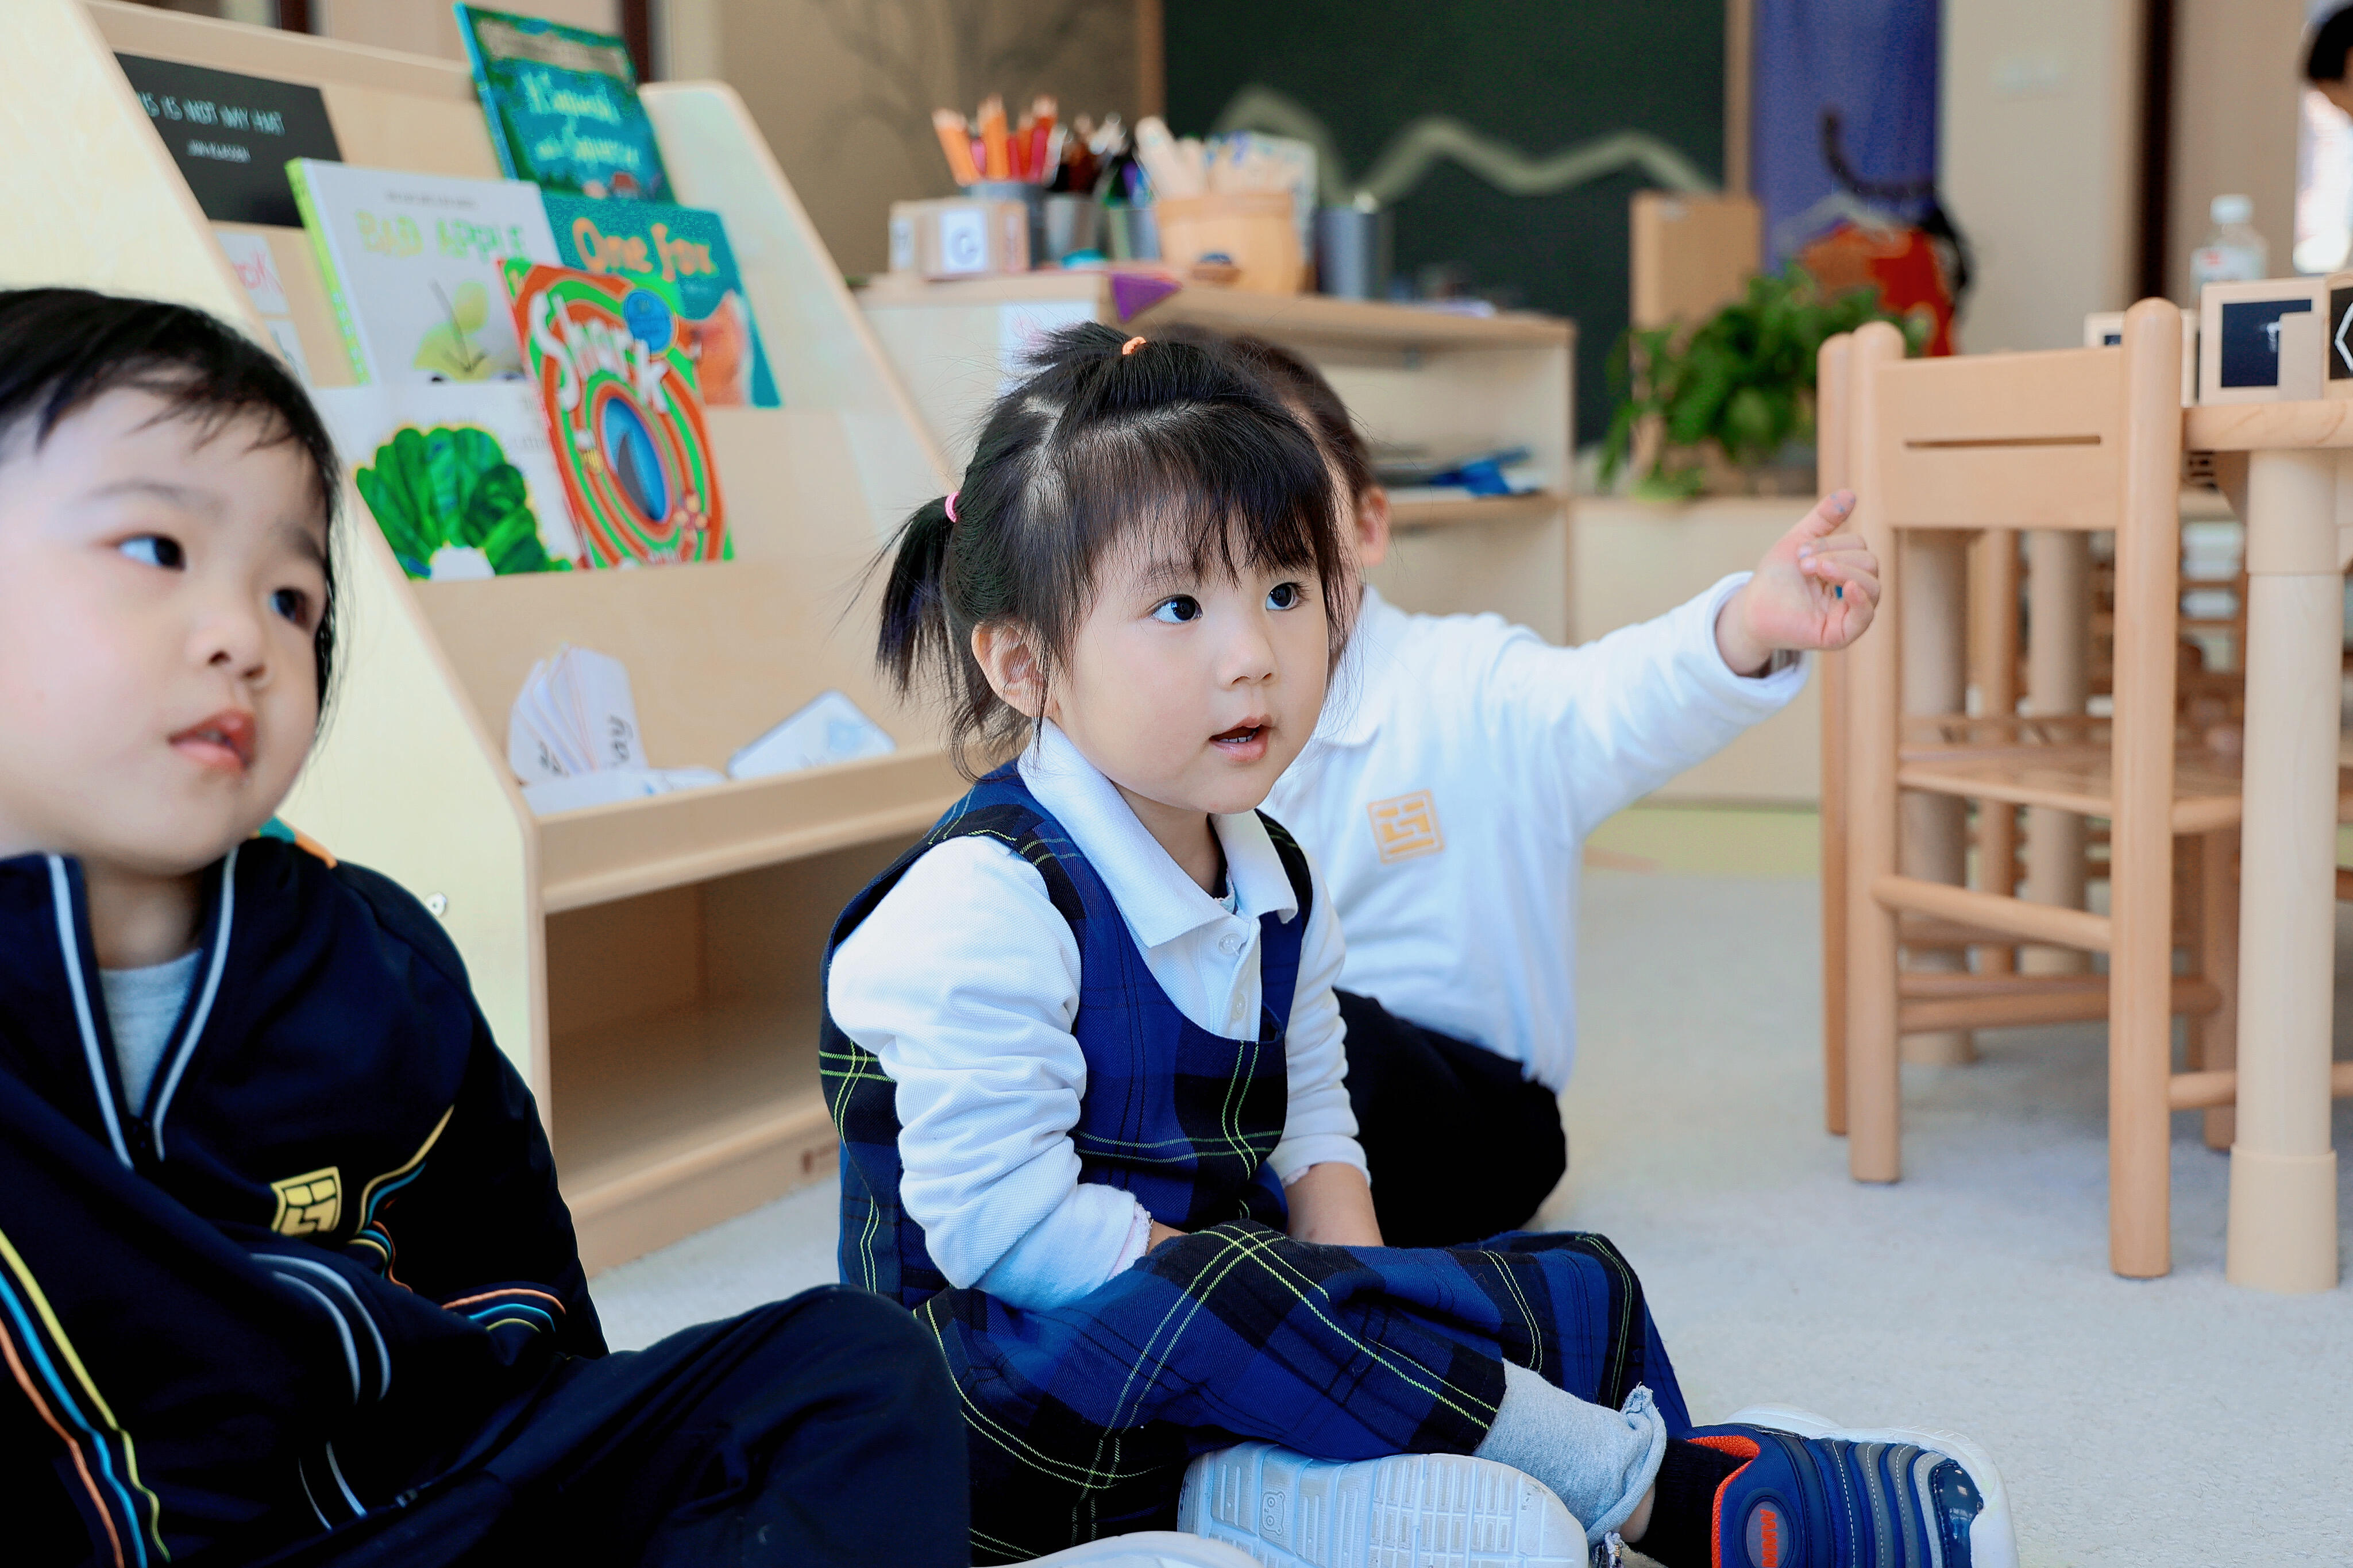 How our pupils will drive learning at Huili Nursery Nantong